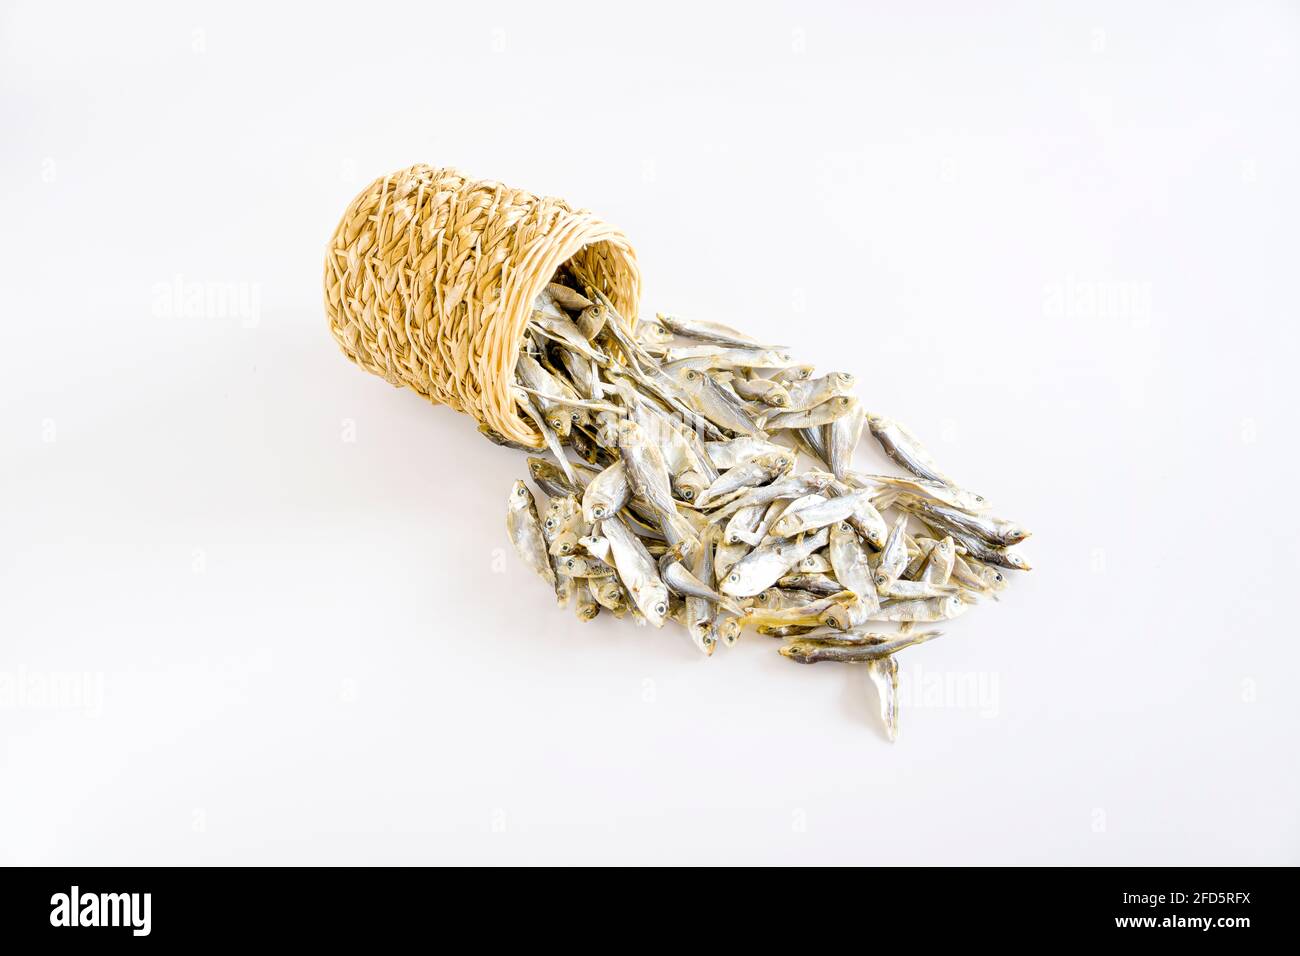 asian traditional dried salty small fish, calcium cooking, isolated on white background Stock Photo